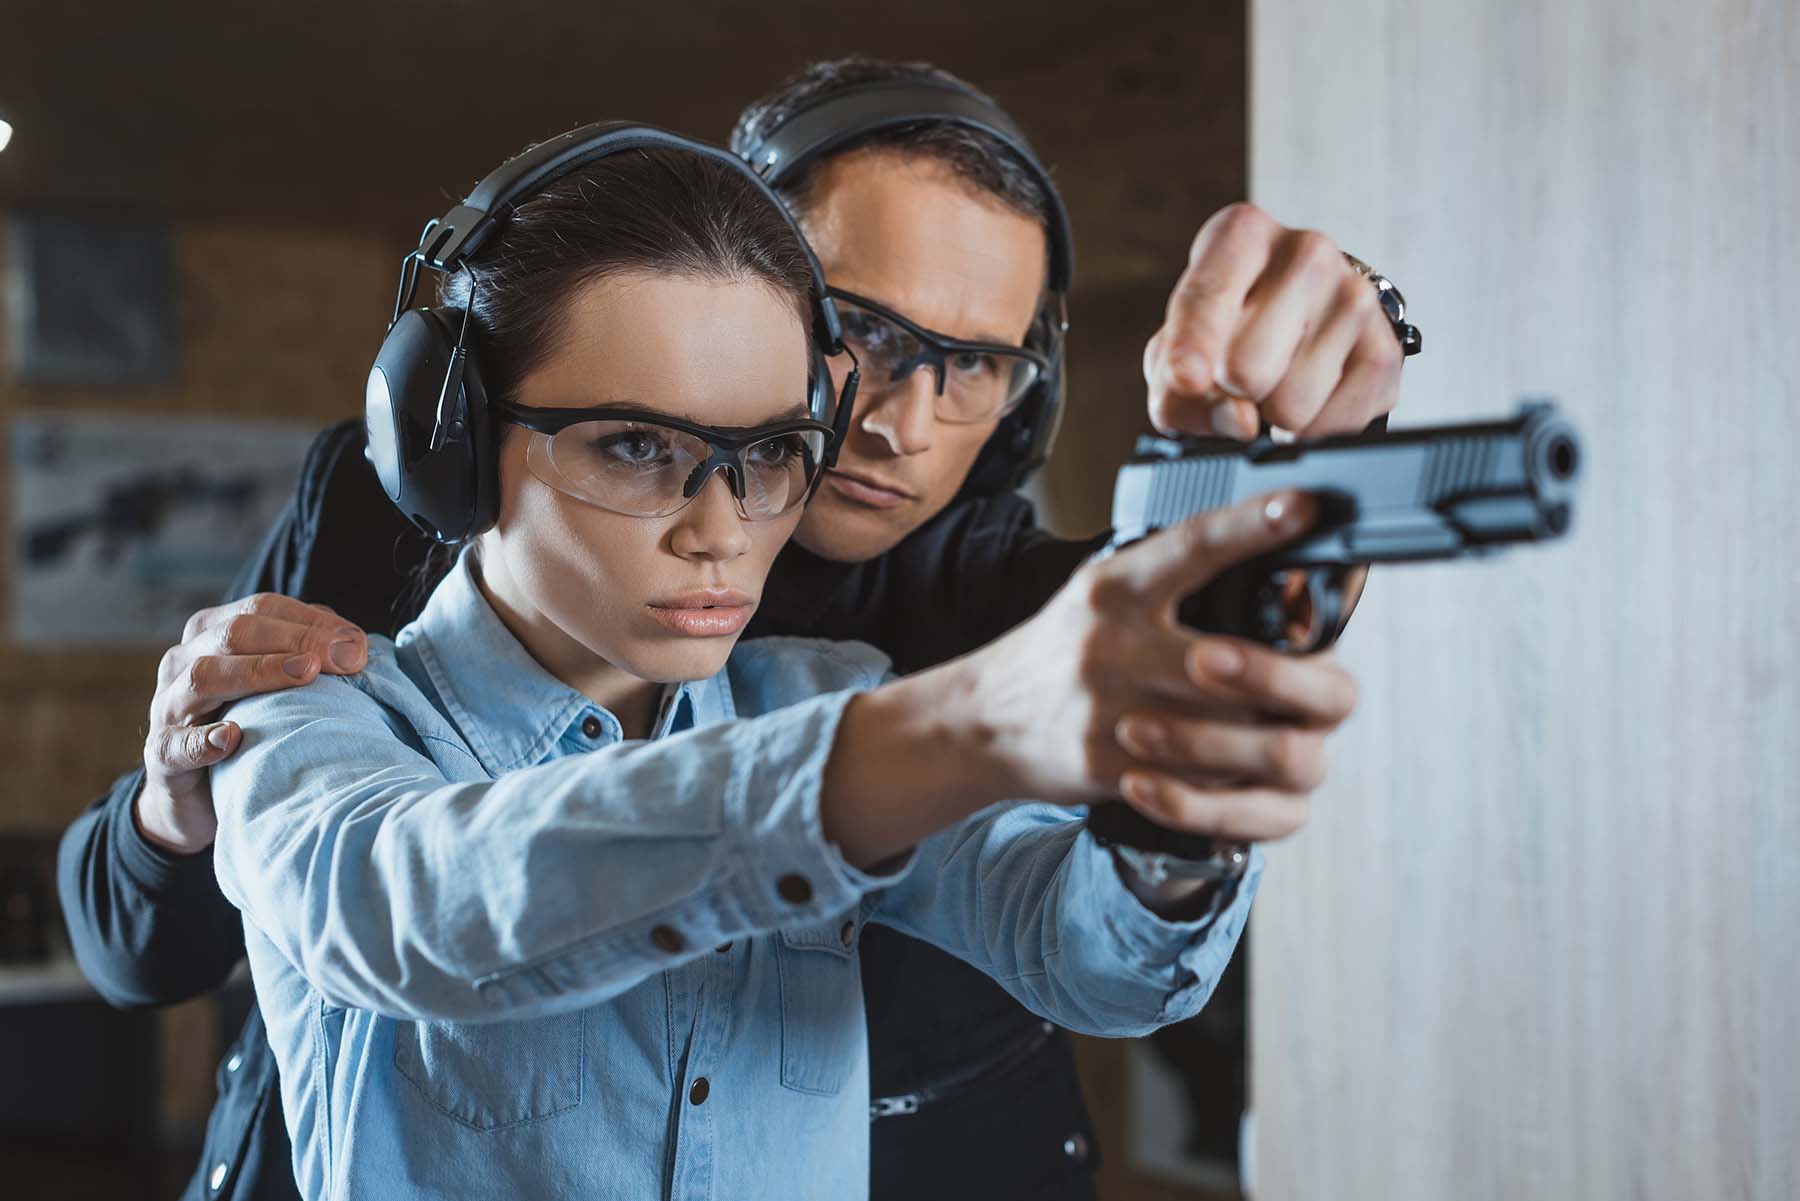 An instructor helping a woman fire her weapon in a shooting range.